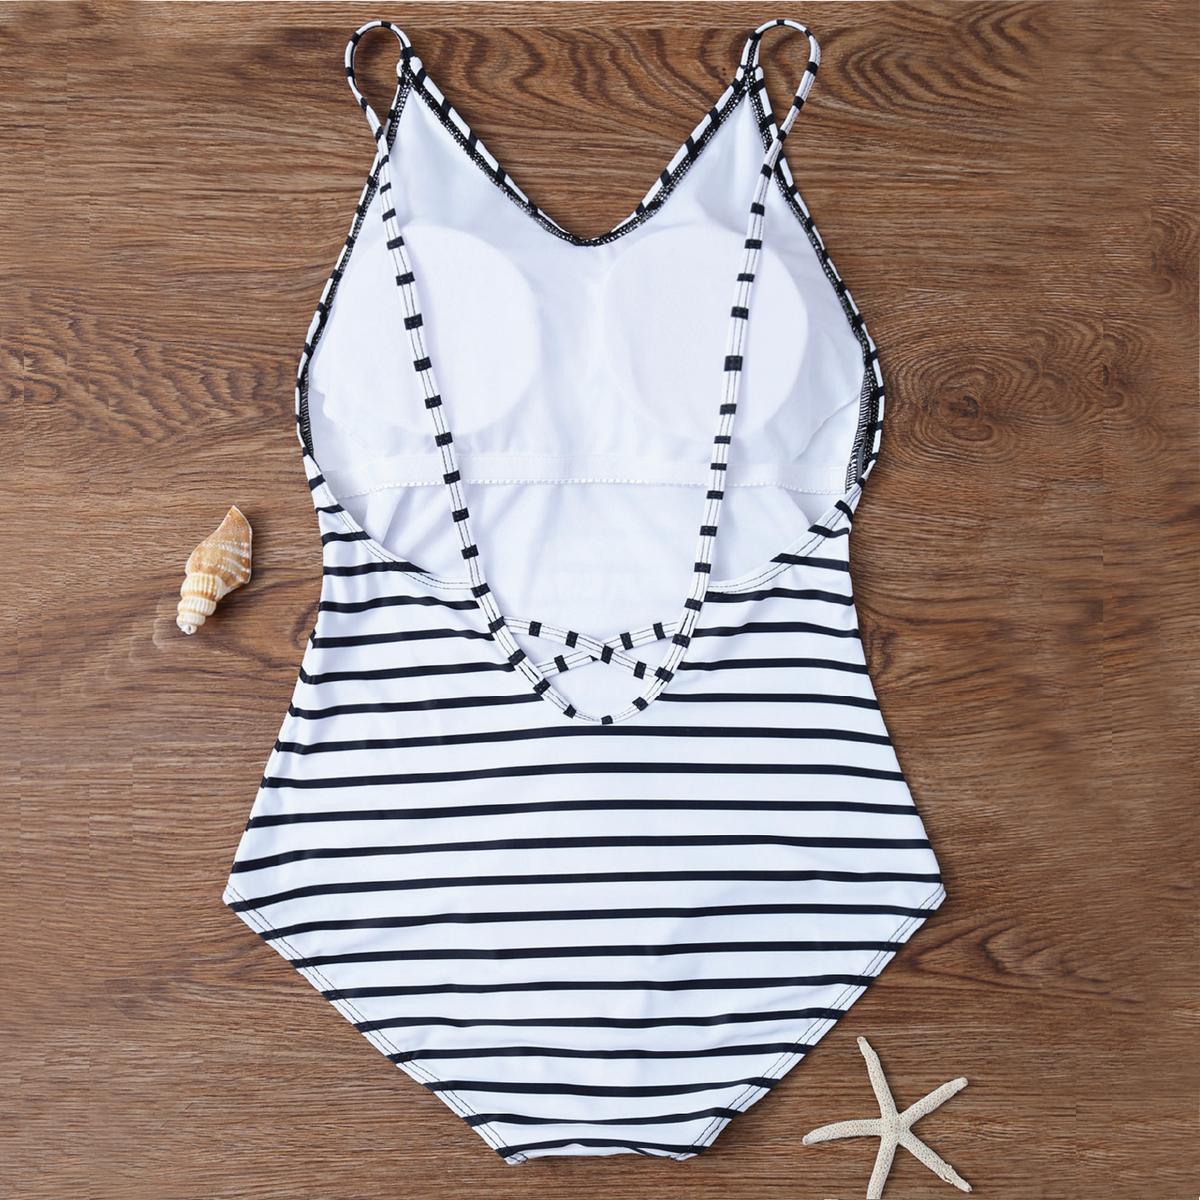 Modest Black White Striped Swimsuit | Shop The Must-haves for You – W.T ...